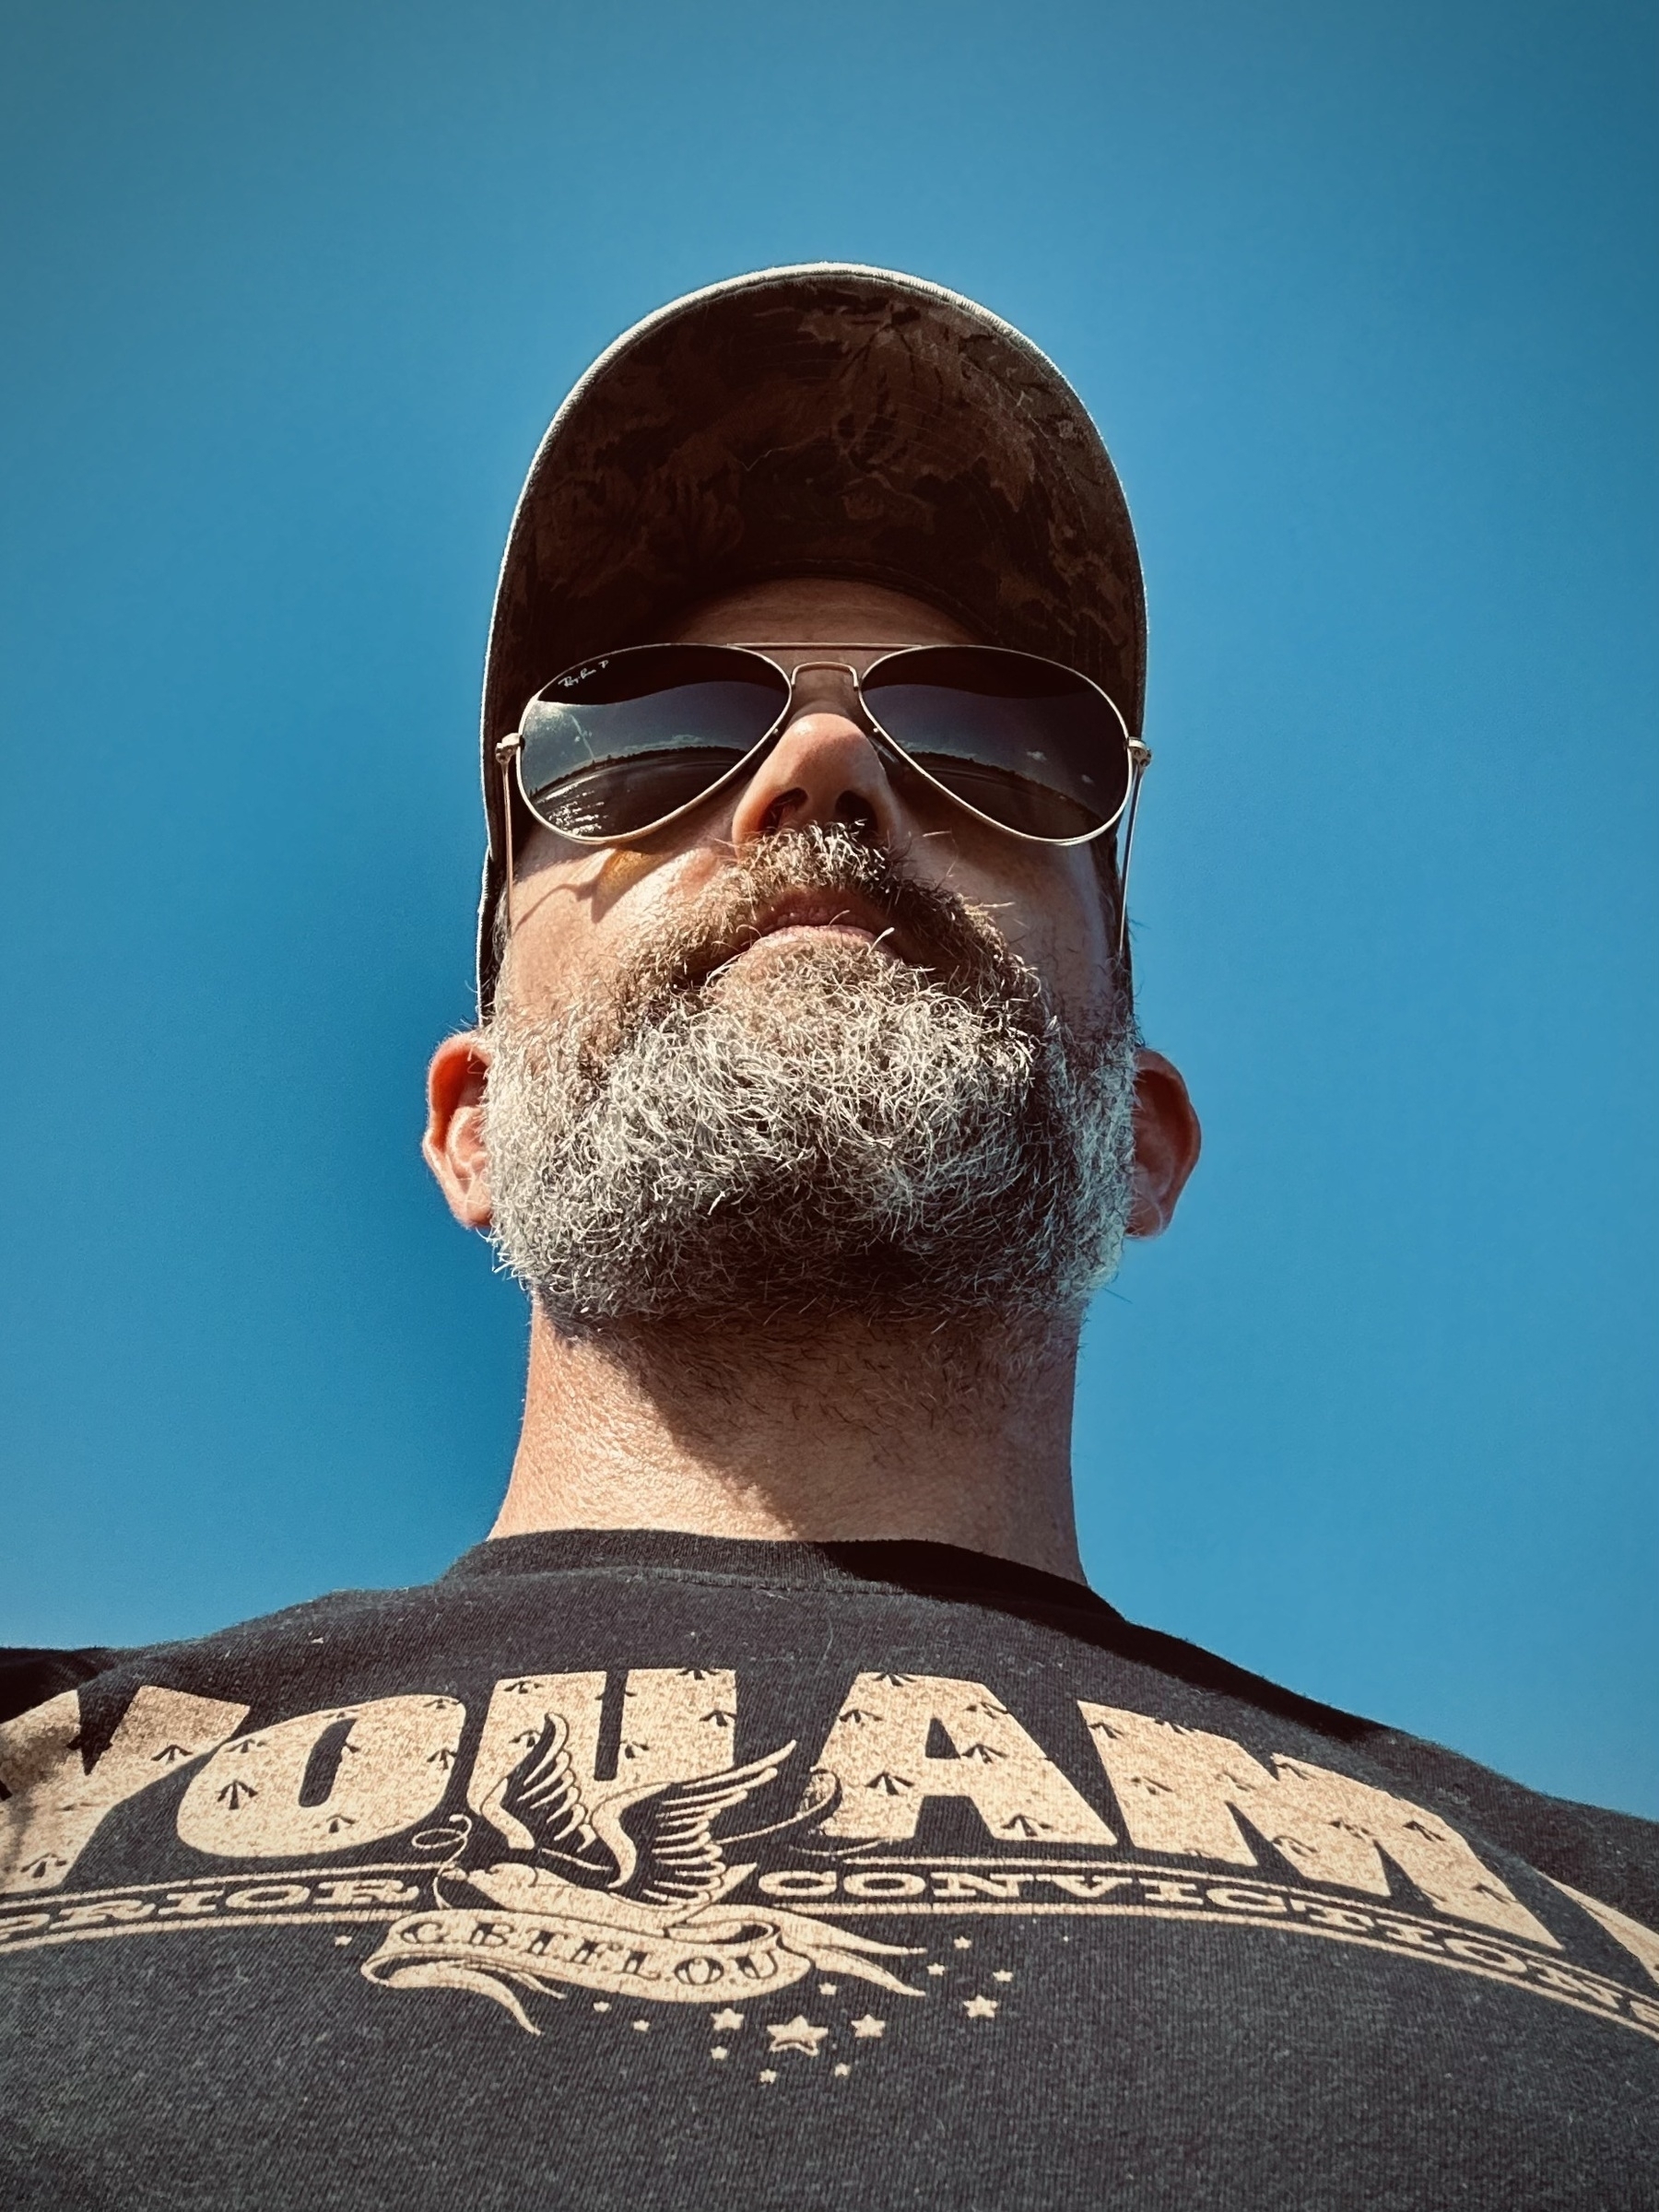 Looking up at the face of 40 something bloke with a greying beard, wearing a You Am I t-shirt and a baseball cap, surrounded by blue sky, an ocean horizon reflected in his aviators.